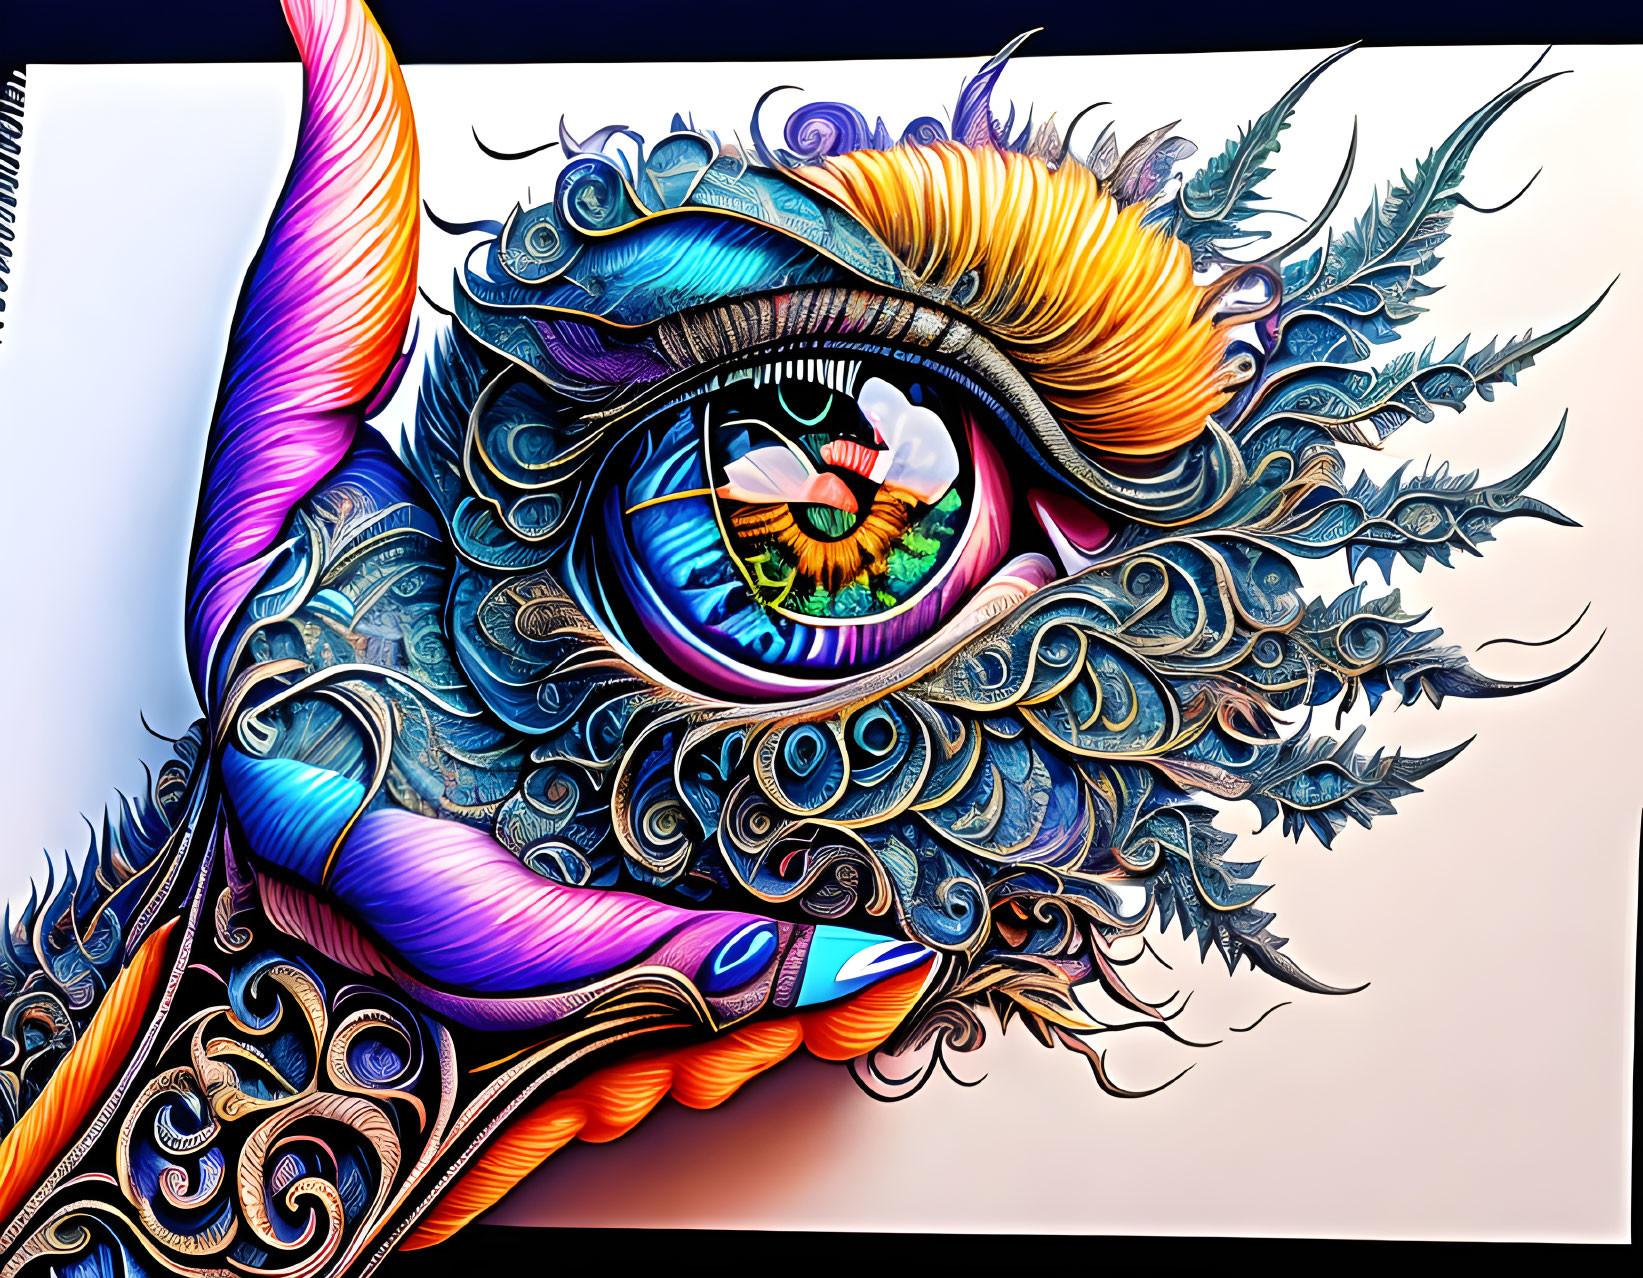 Detailed illustration of vibrant eye with colorful feather-like patterns and reflection of figure in pupil.